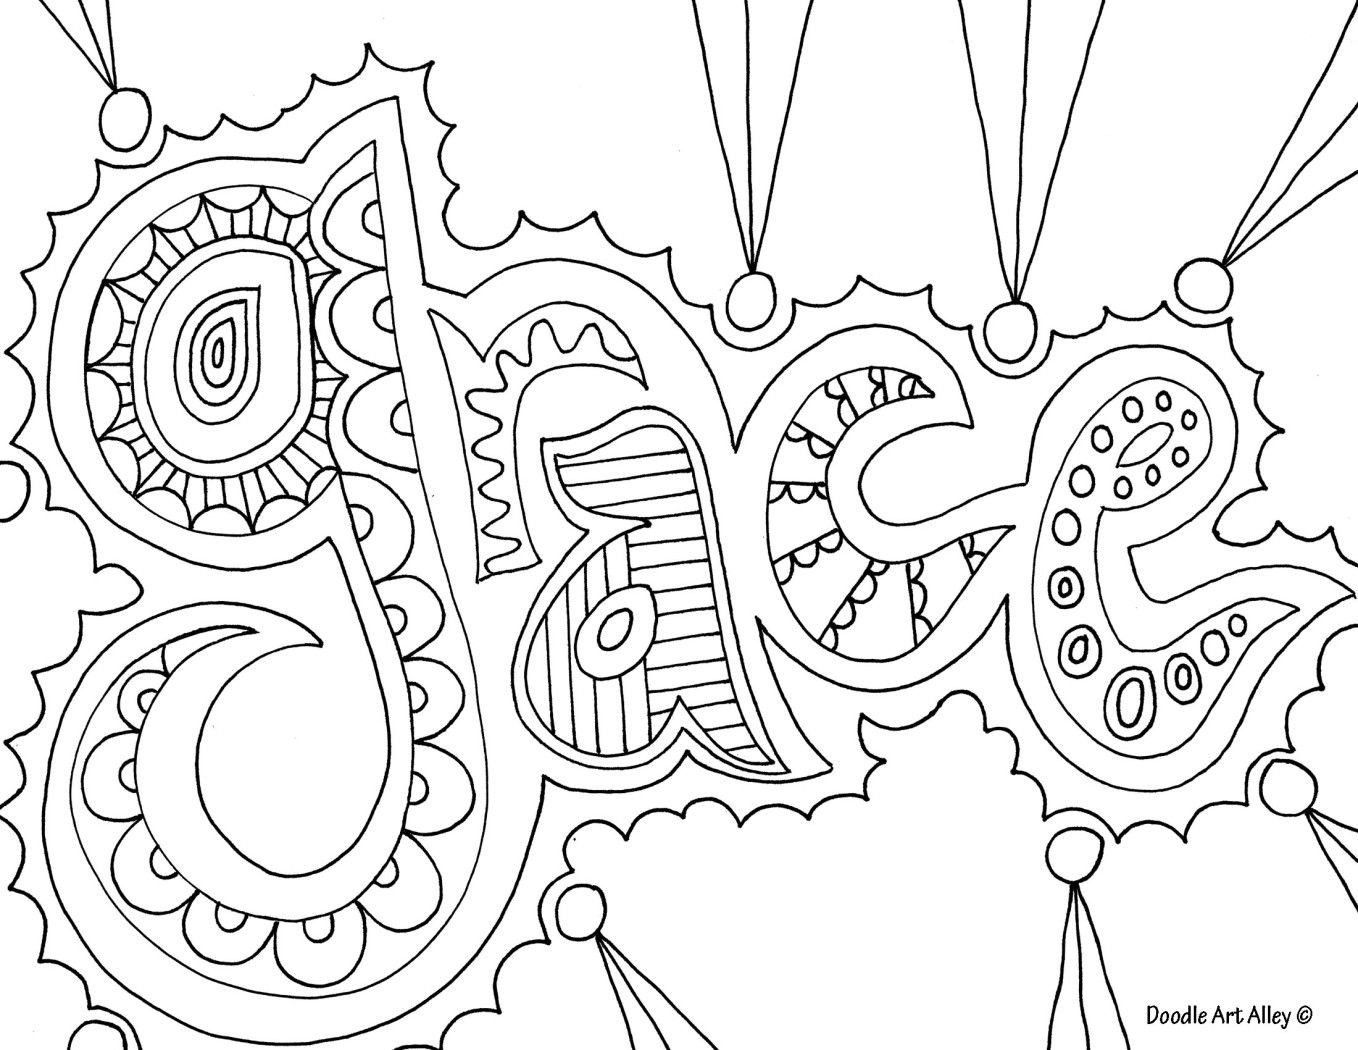 Printable Name Coloring Pages
 Doodle art grace nice coloring page for older kids